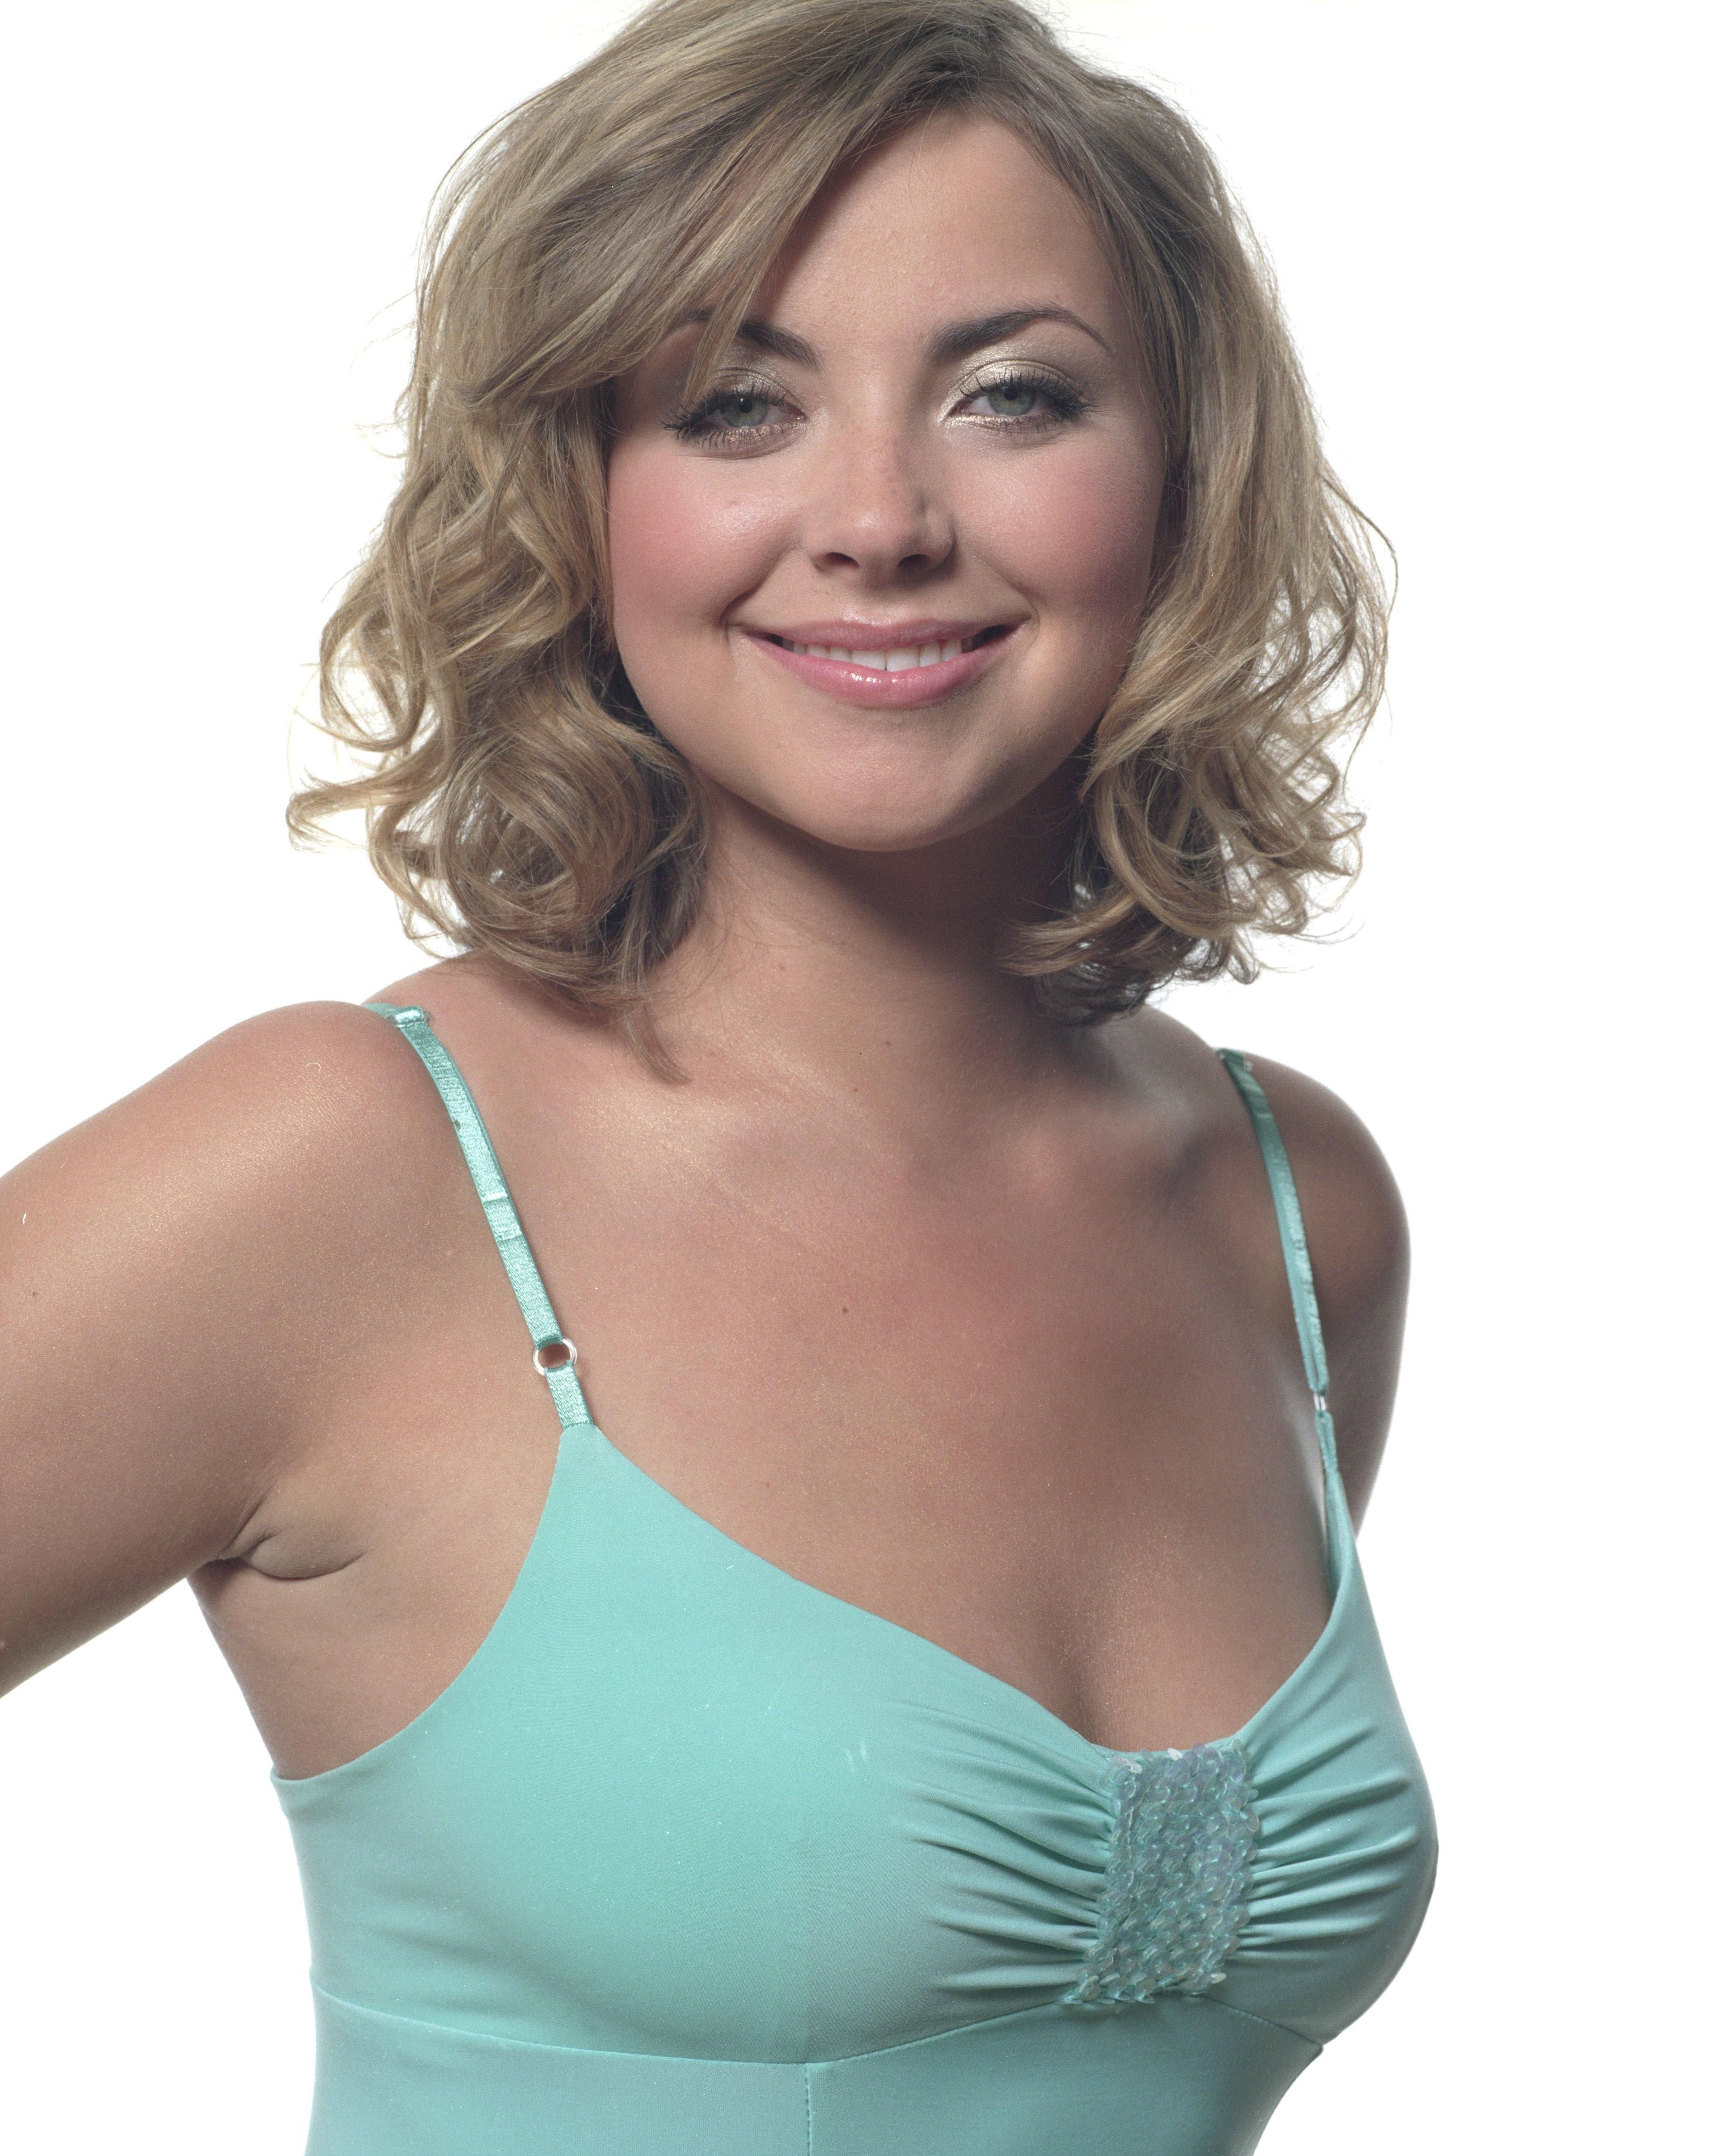 Nice Images Collection: Charlotte Church Desktop Wallpapers